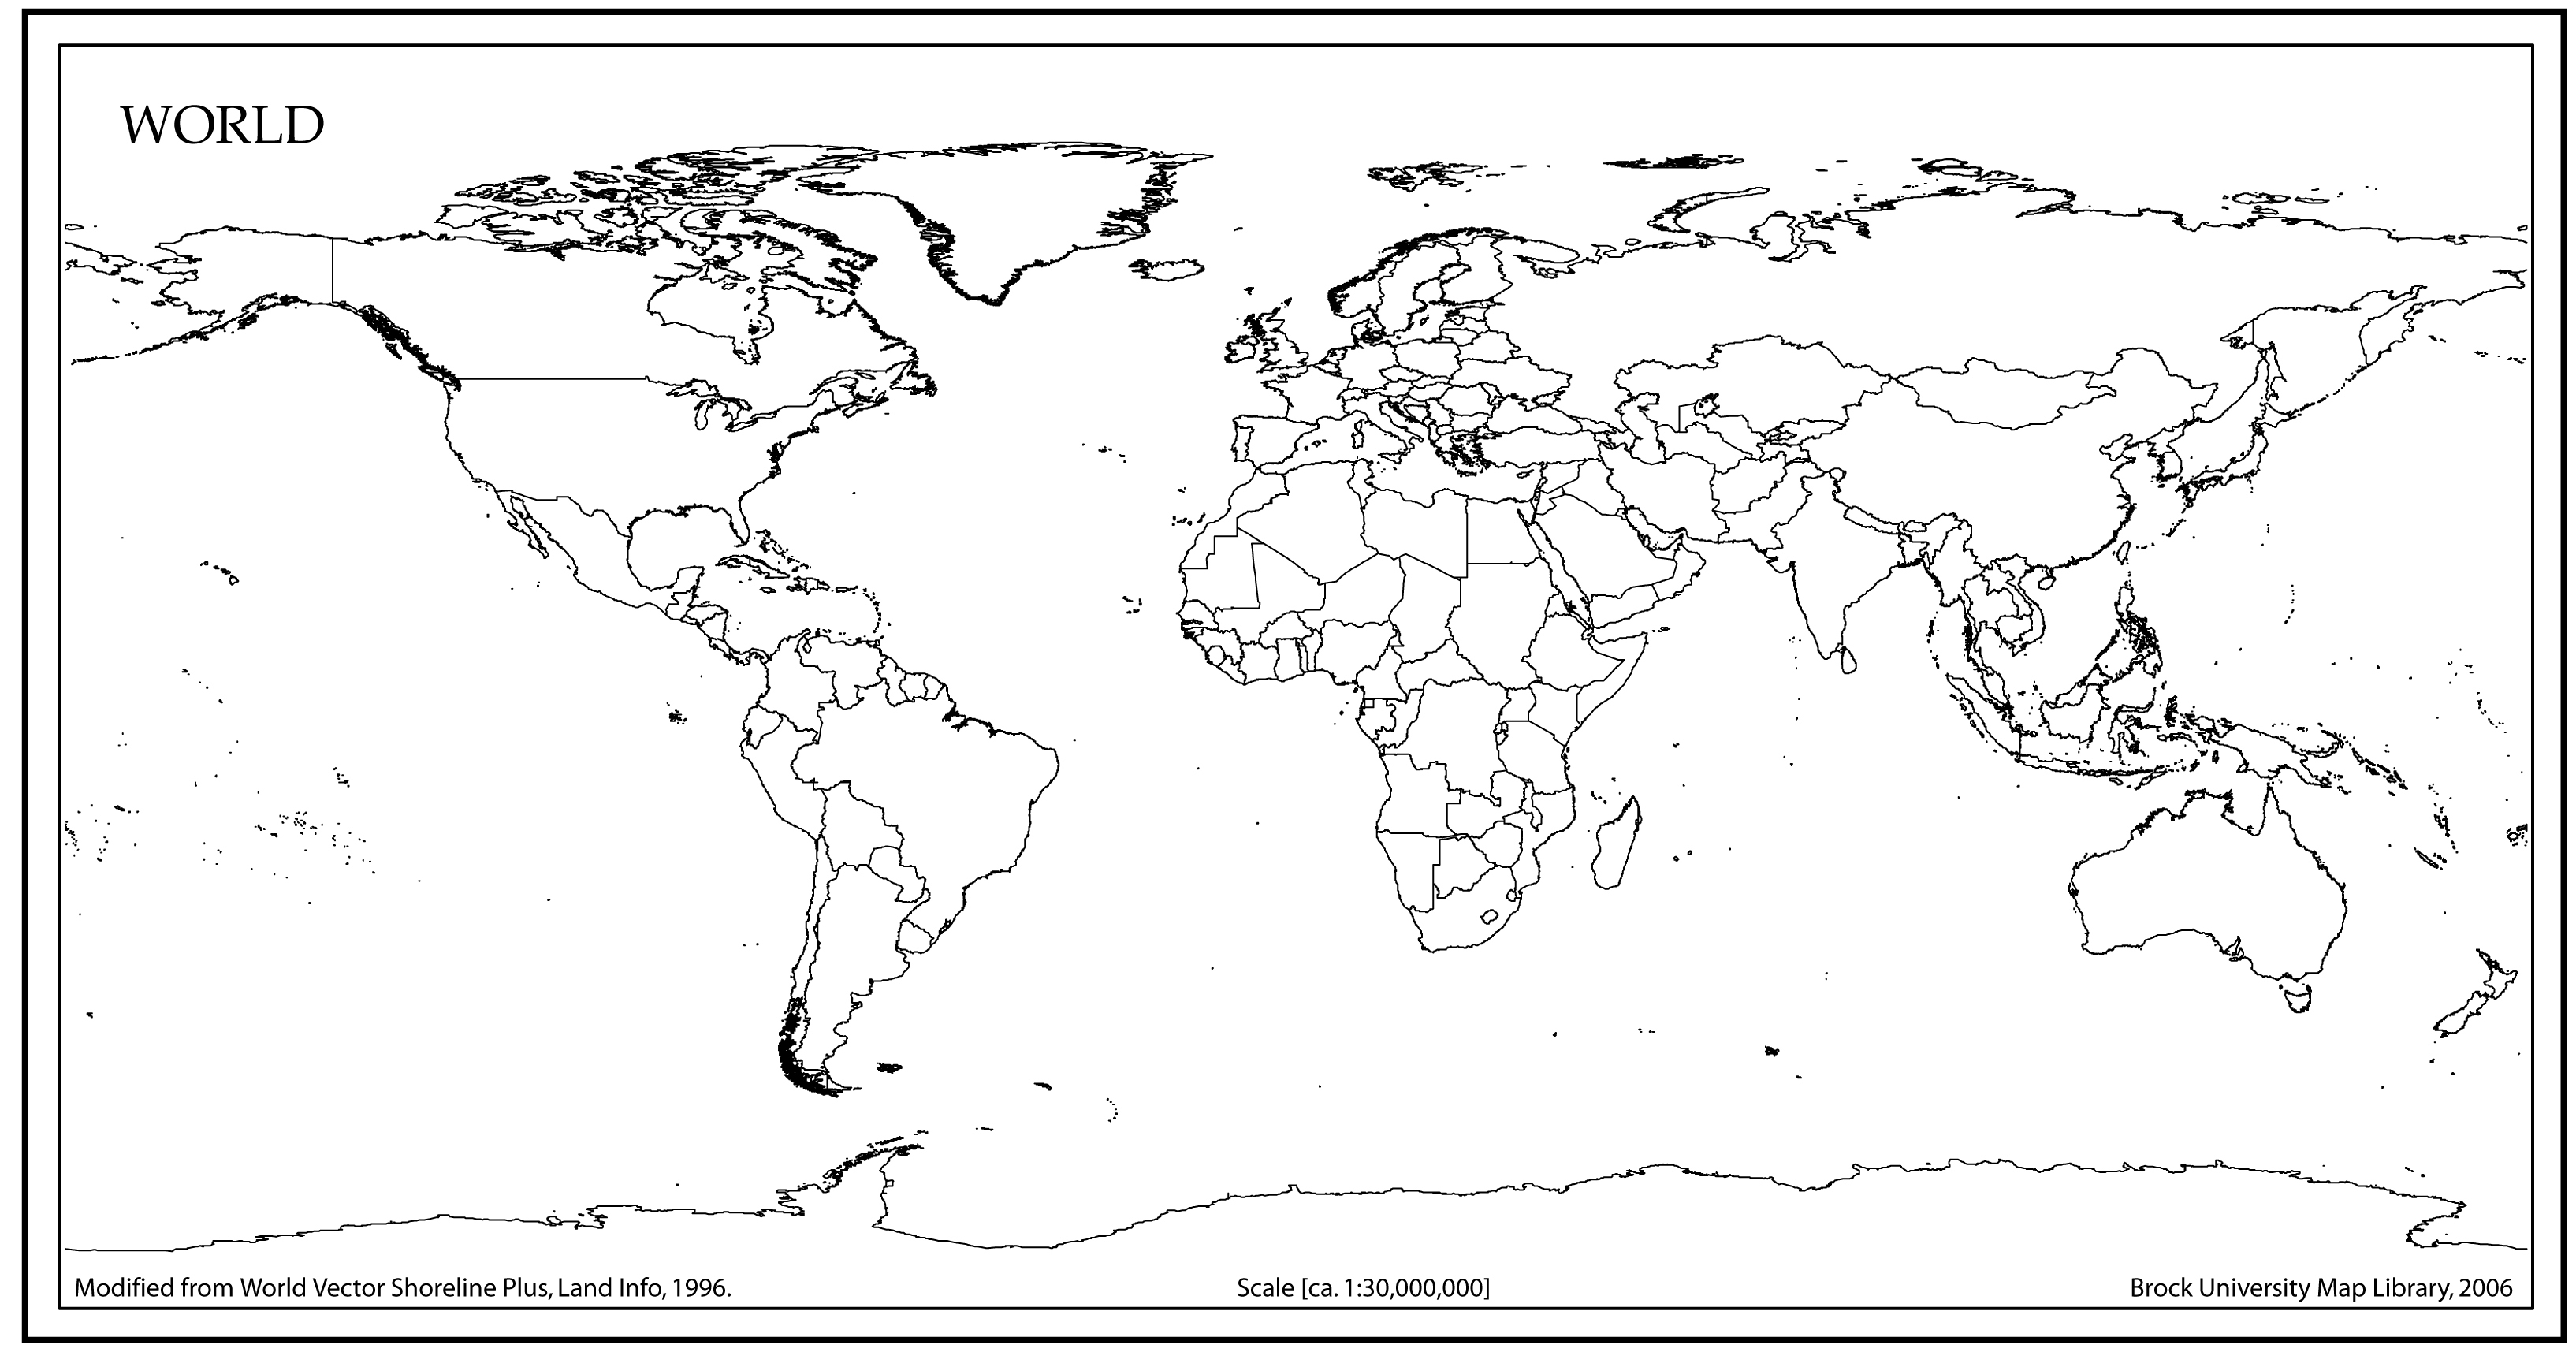 4 Best Images of World Map Outline Printable  World Map Outline with Countries, Printable Blank 